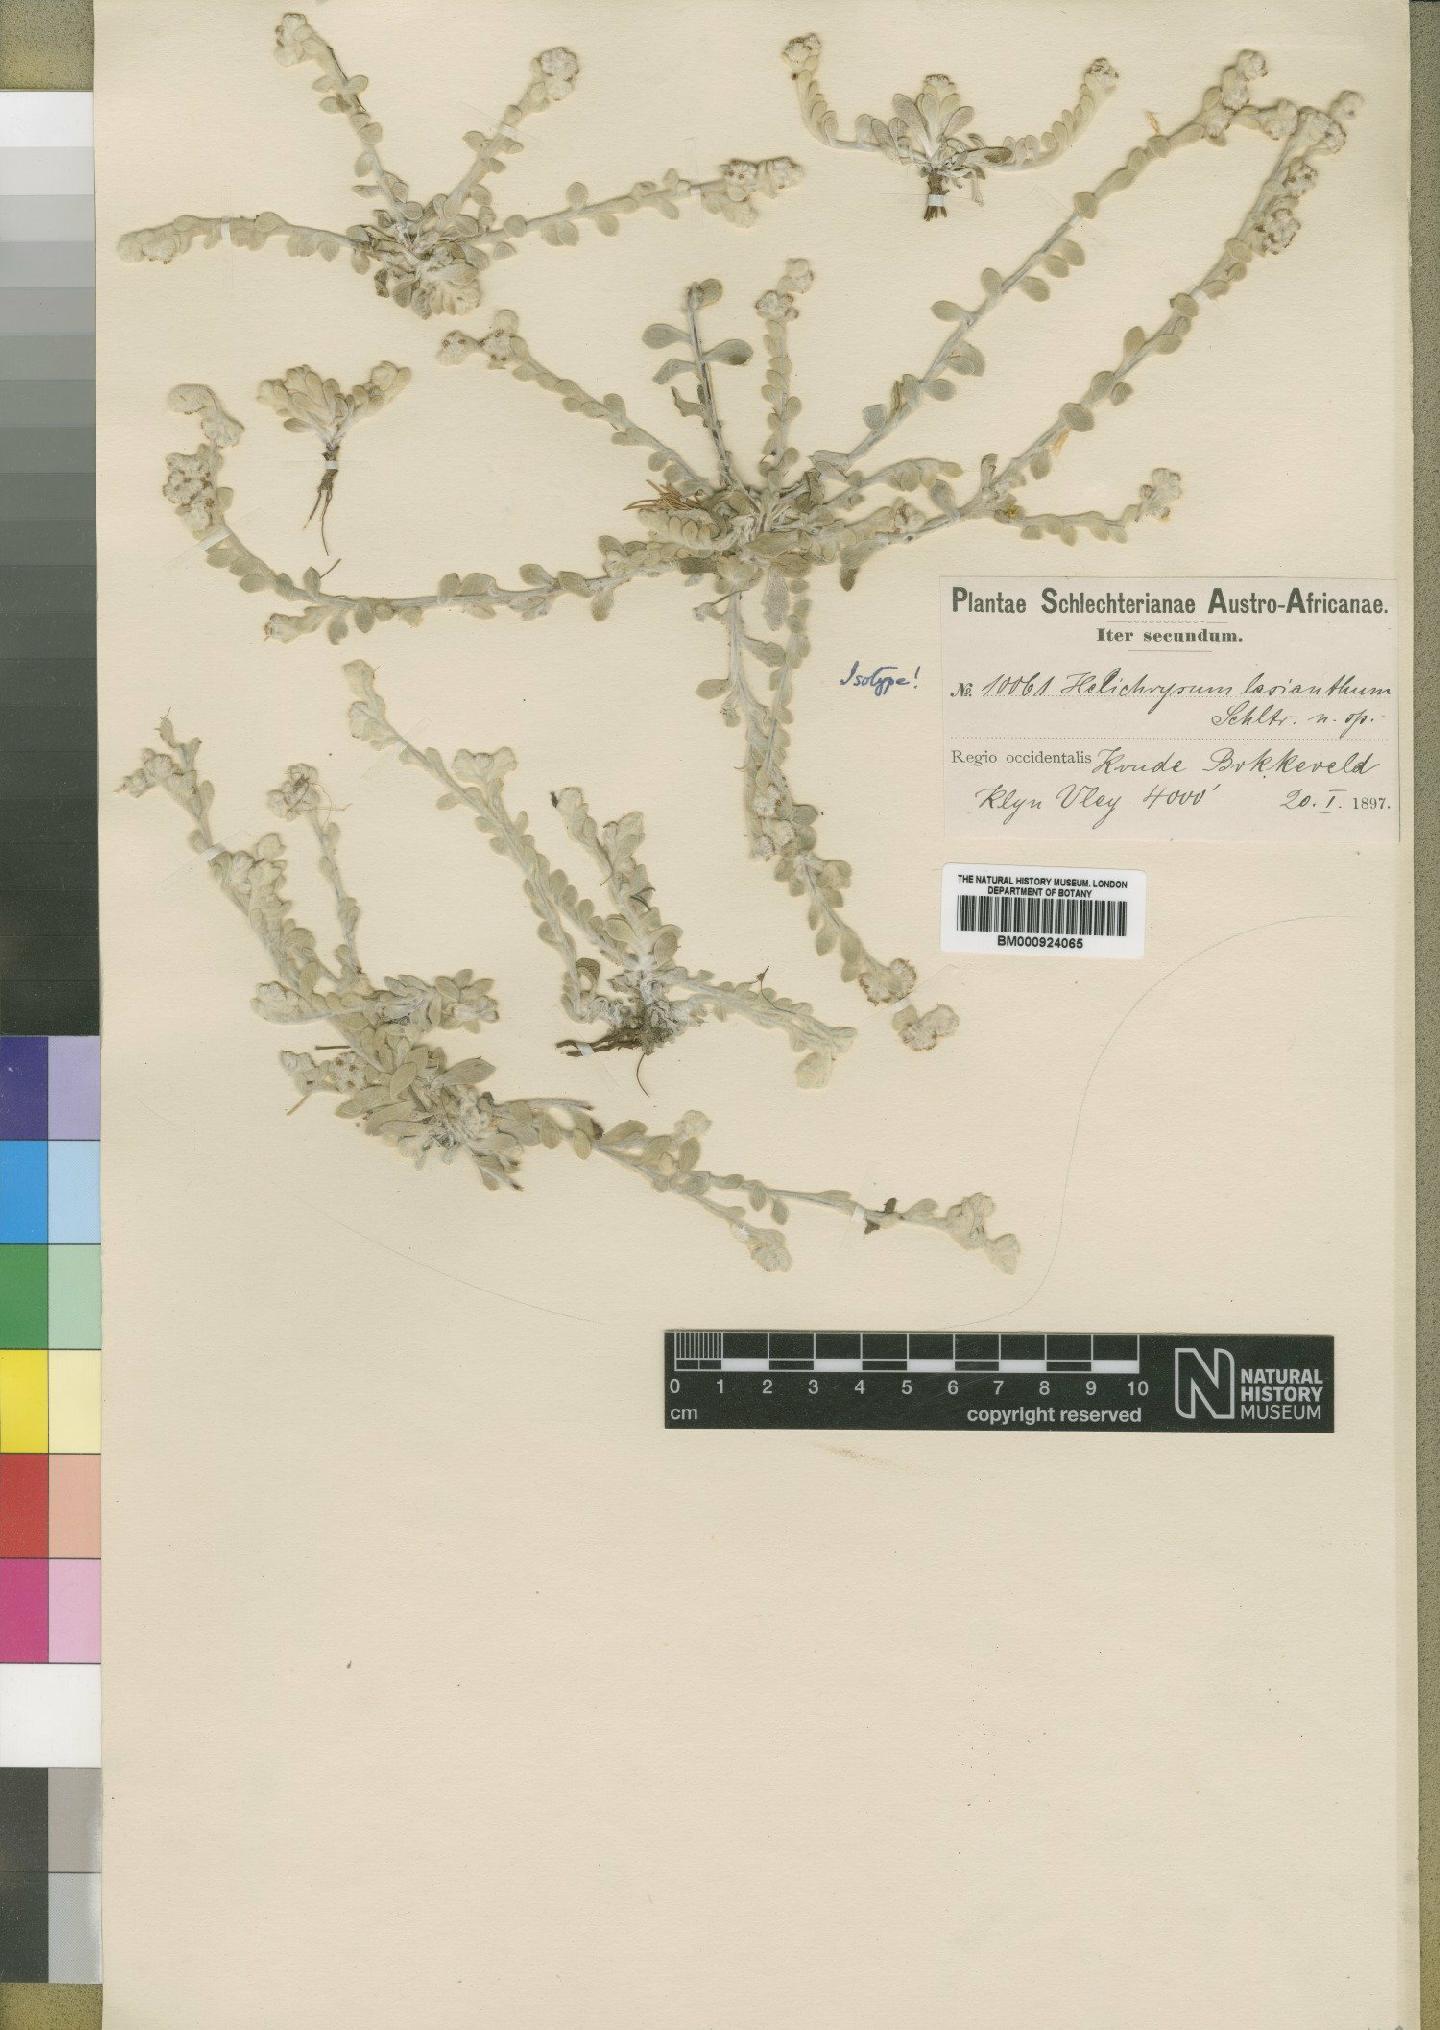 To NHMUK collection (Helichrysum lasianthum Schltr. & Moeser; Isotype; NHMUK:ecatalogue:4529093)